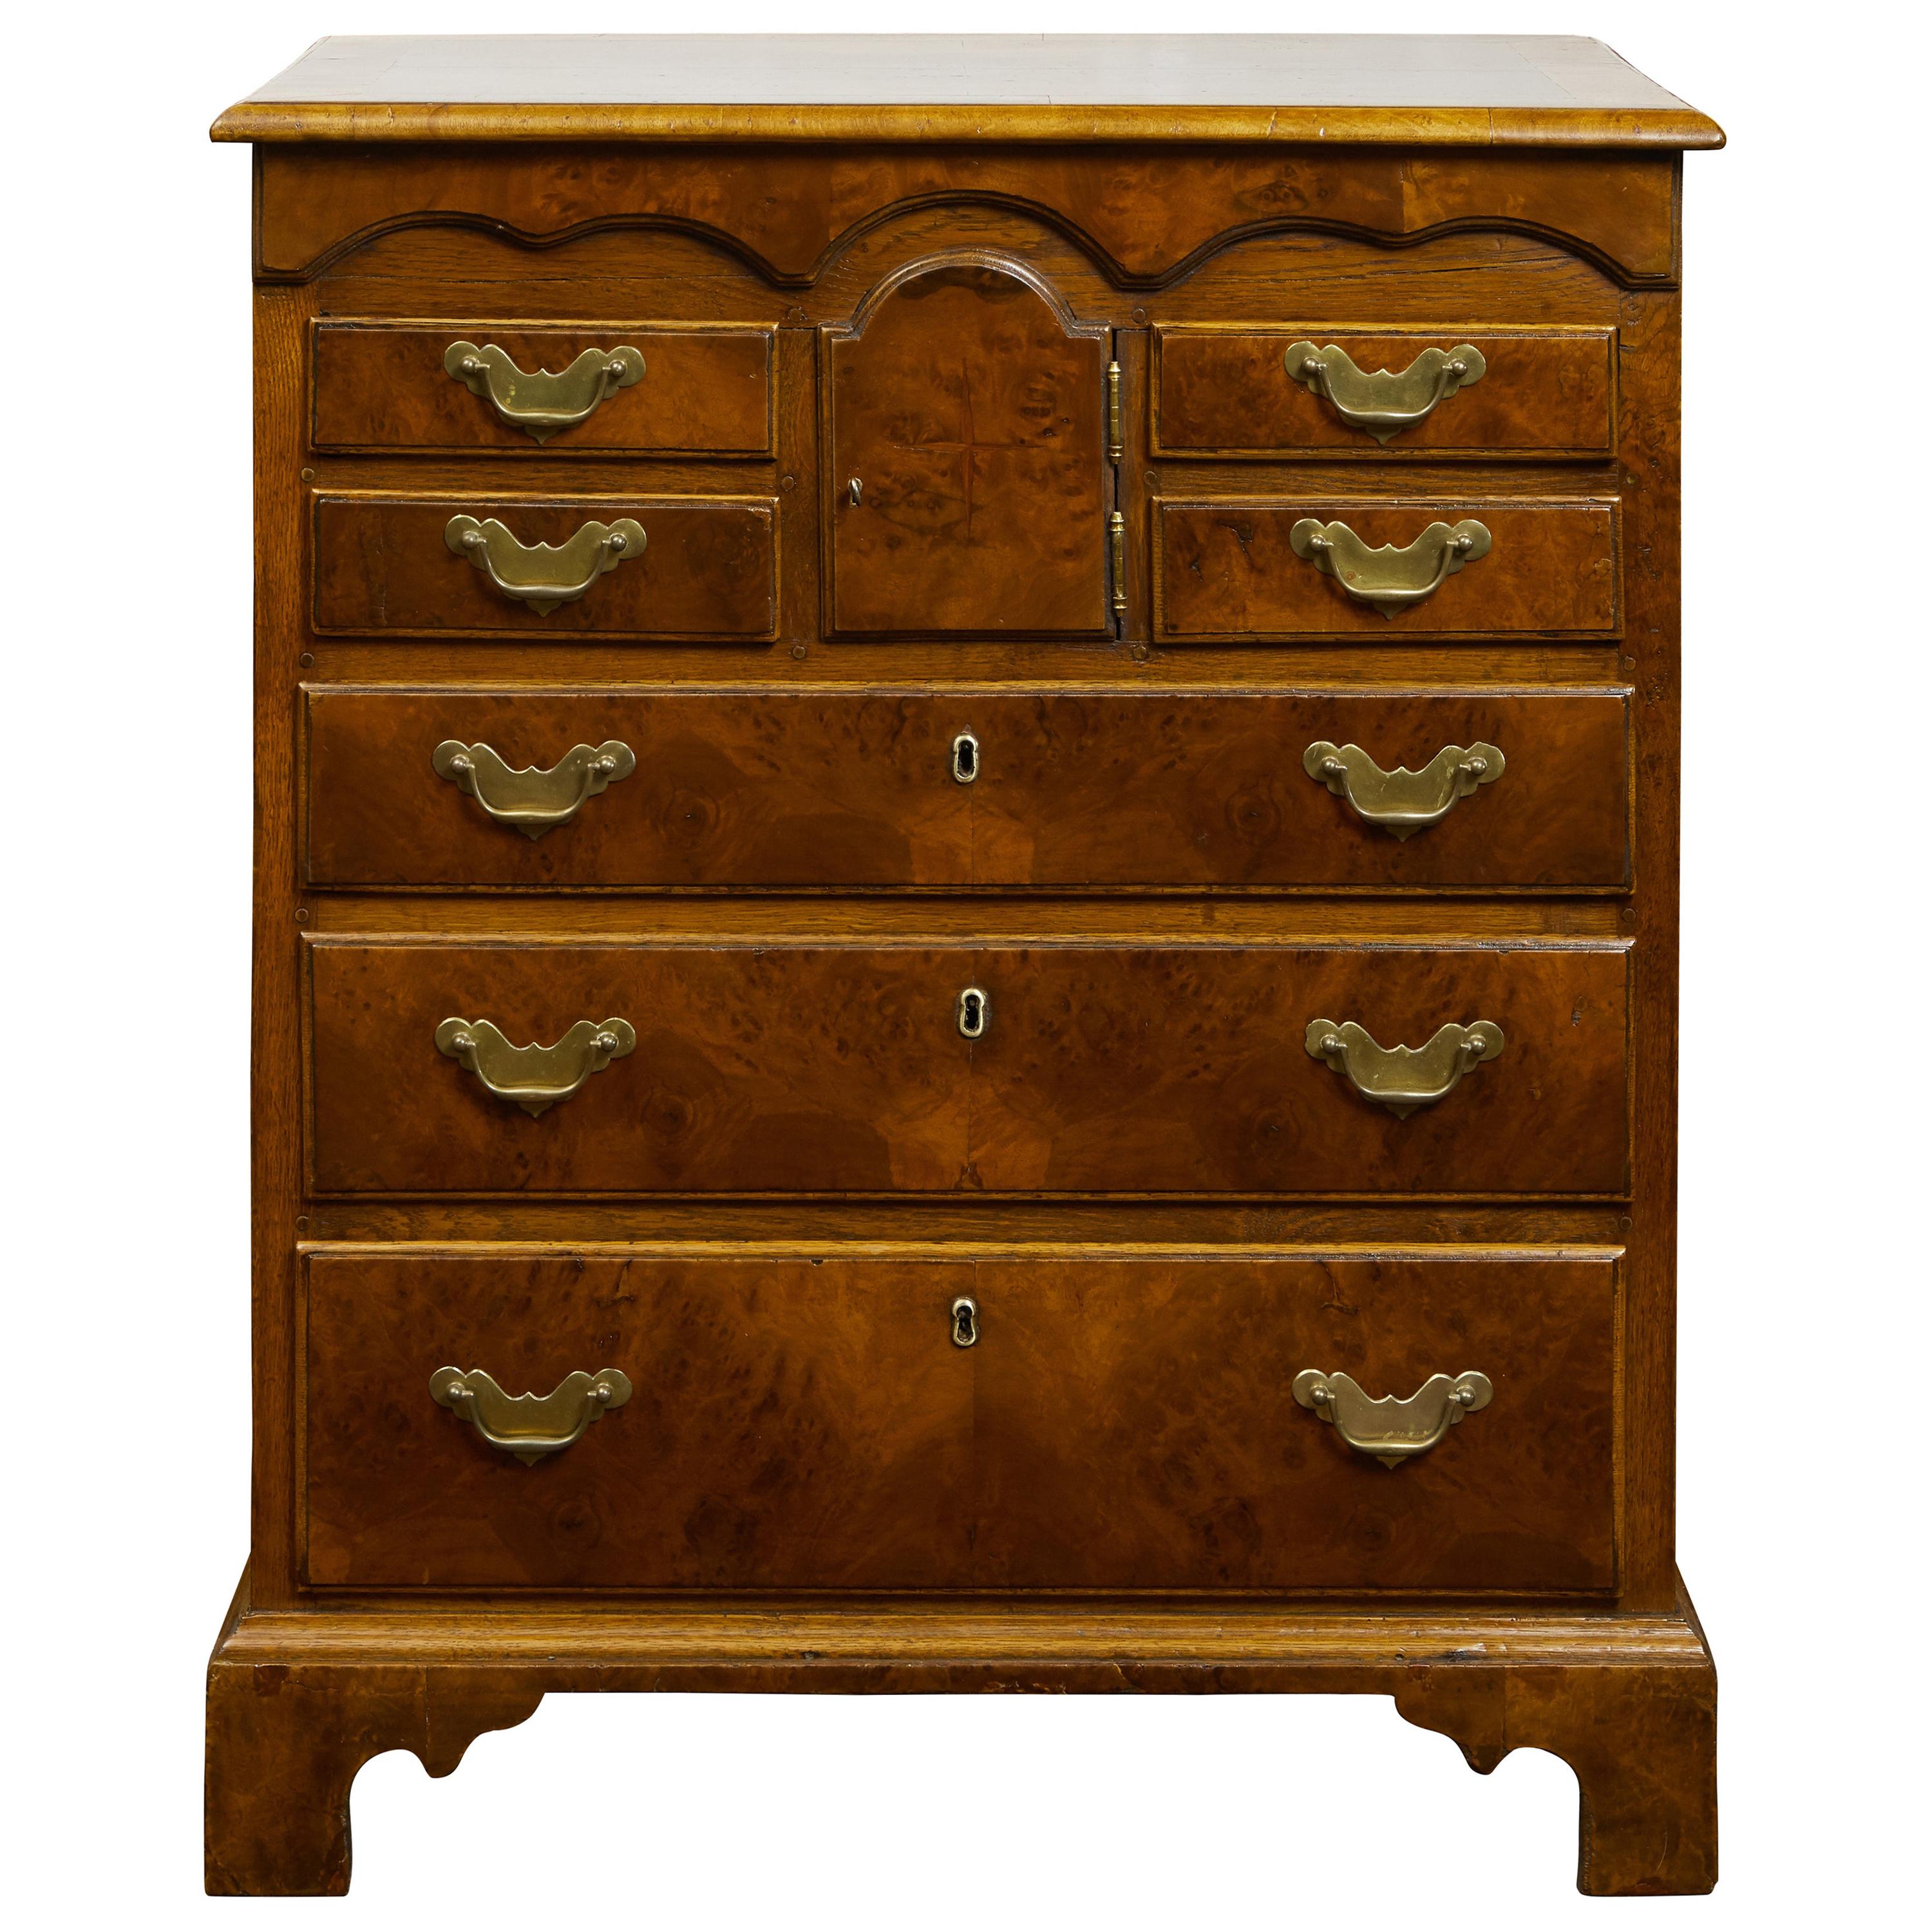 English 19th Century Walnut Commode with Graduating Drawers and Petite Door